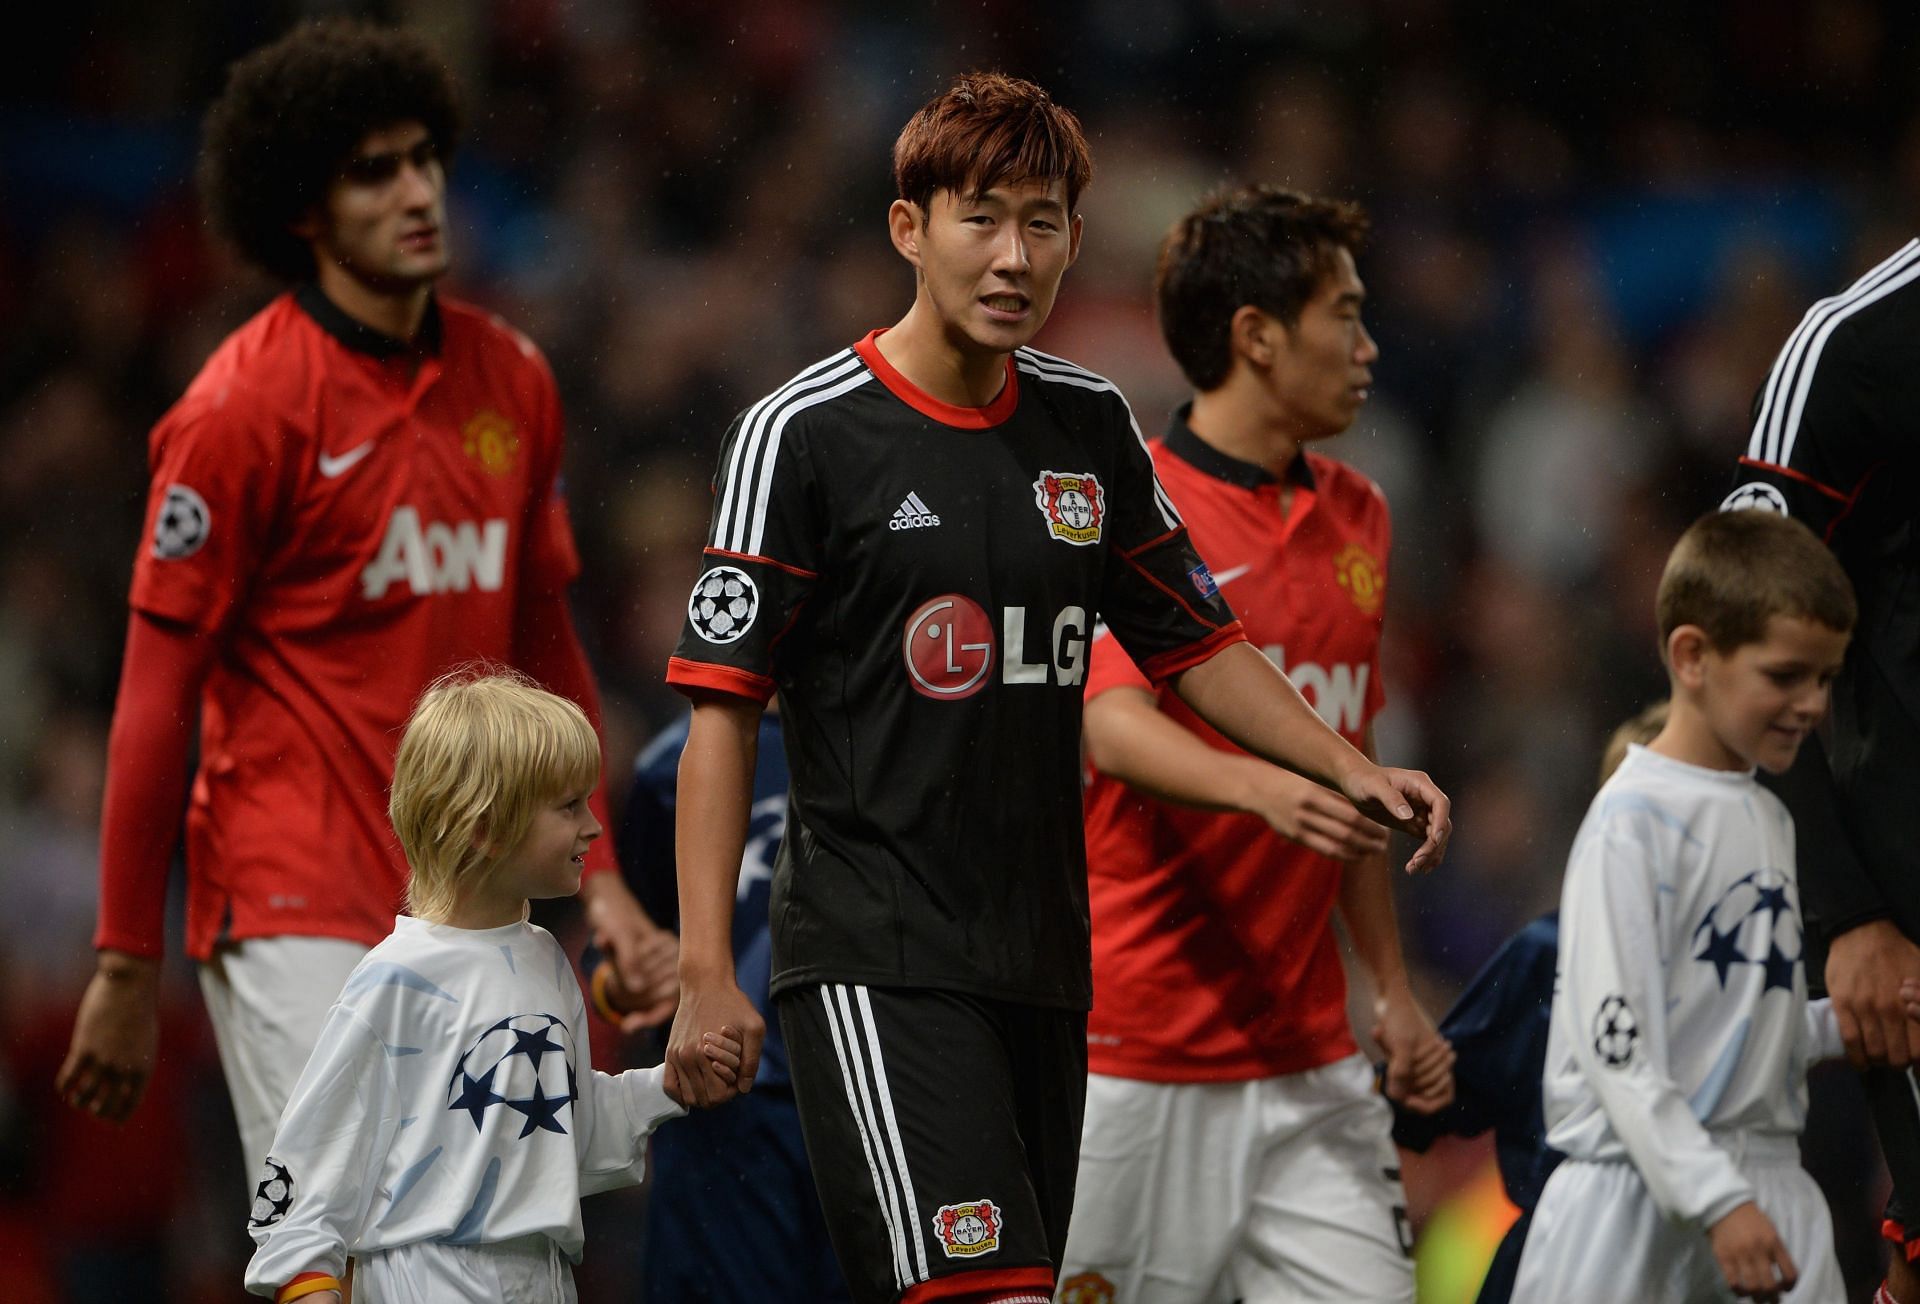 Son Heung-Min of Bayer Leverkusen before the UCL clash against Manchester United